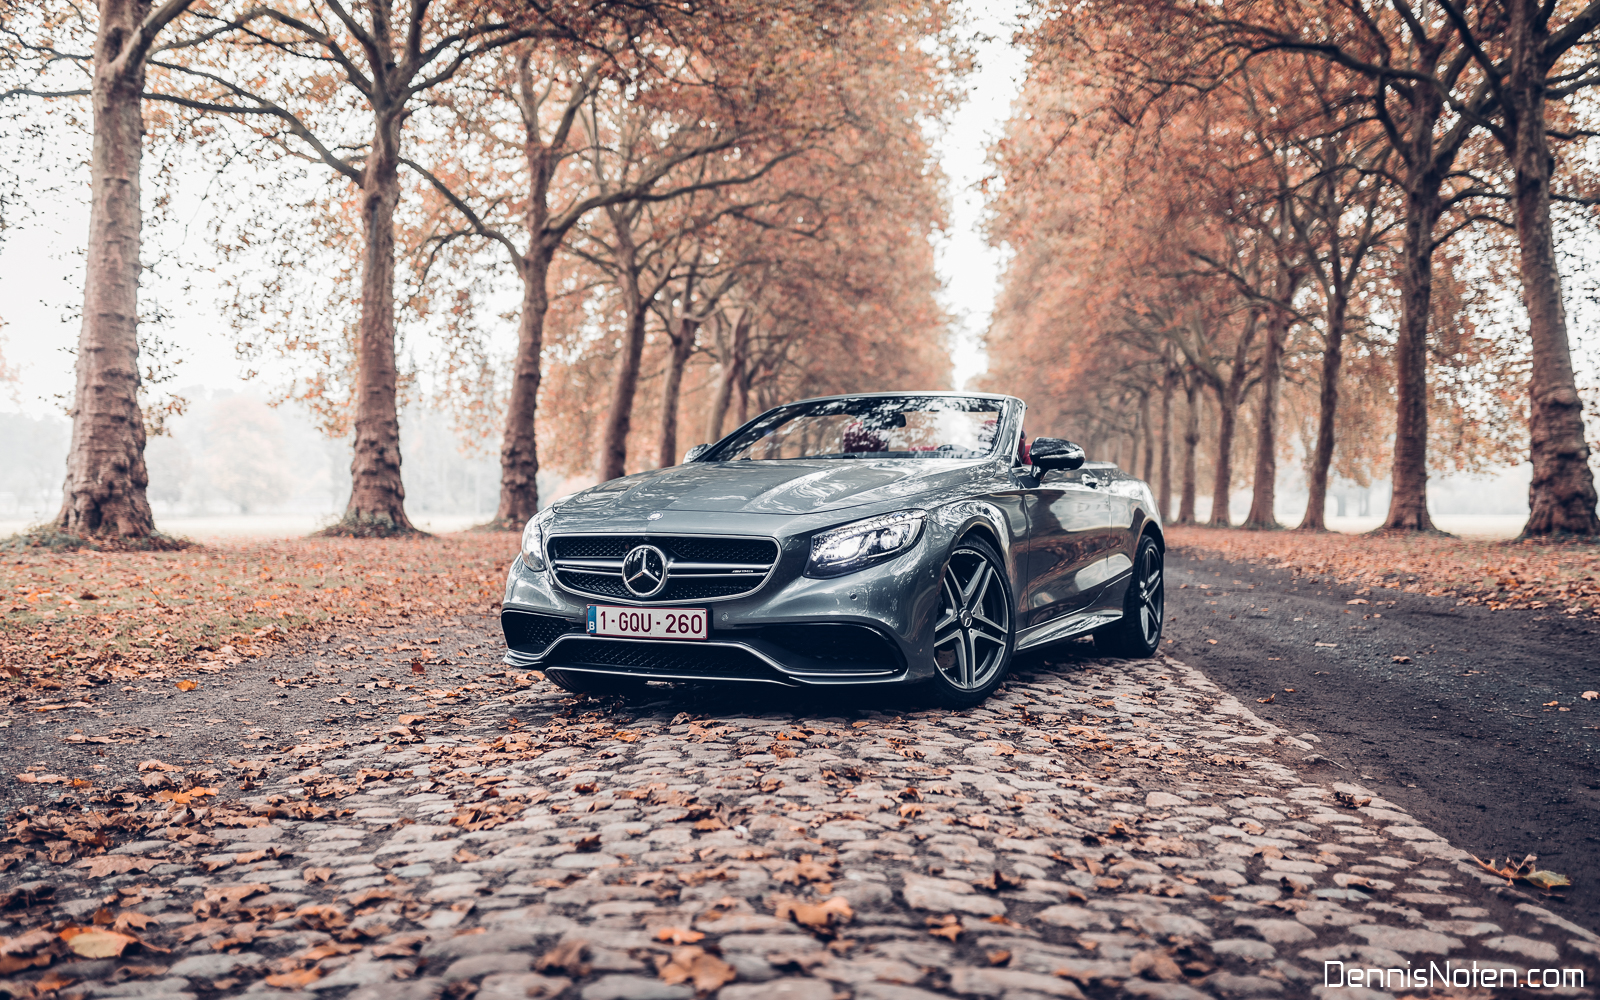 Mercedes-Benz S63 AMG Convertible & Smart Brabus Cabriolet for